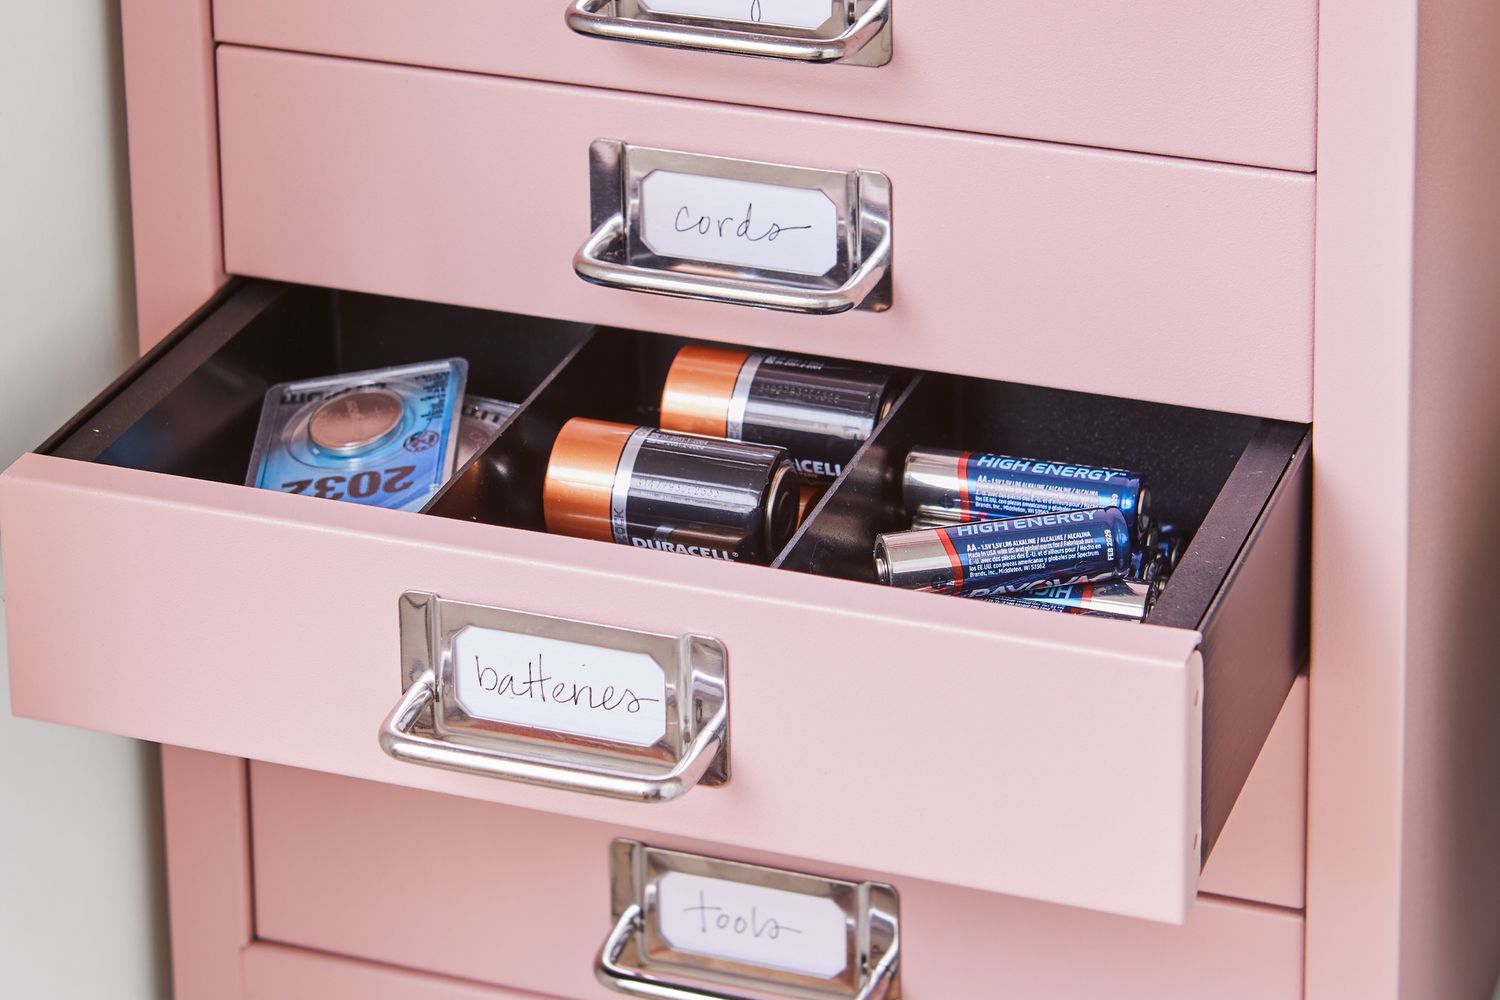 batteries stories in pink file cabinet